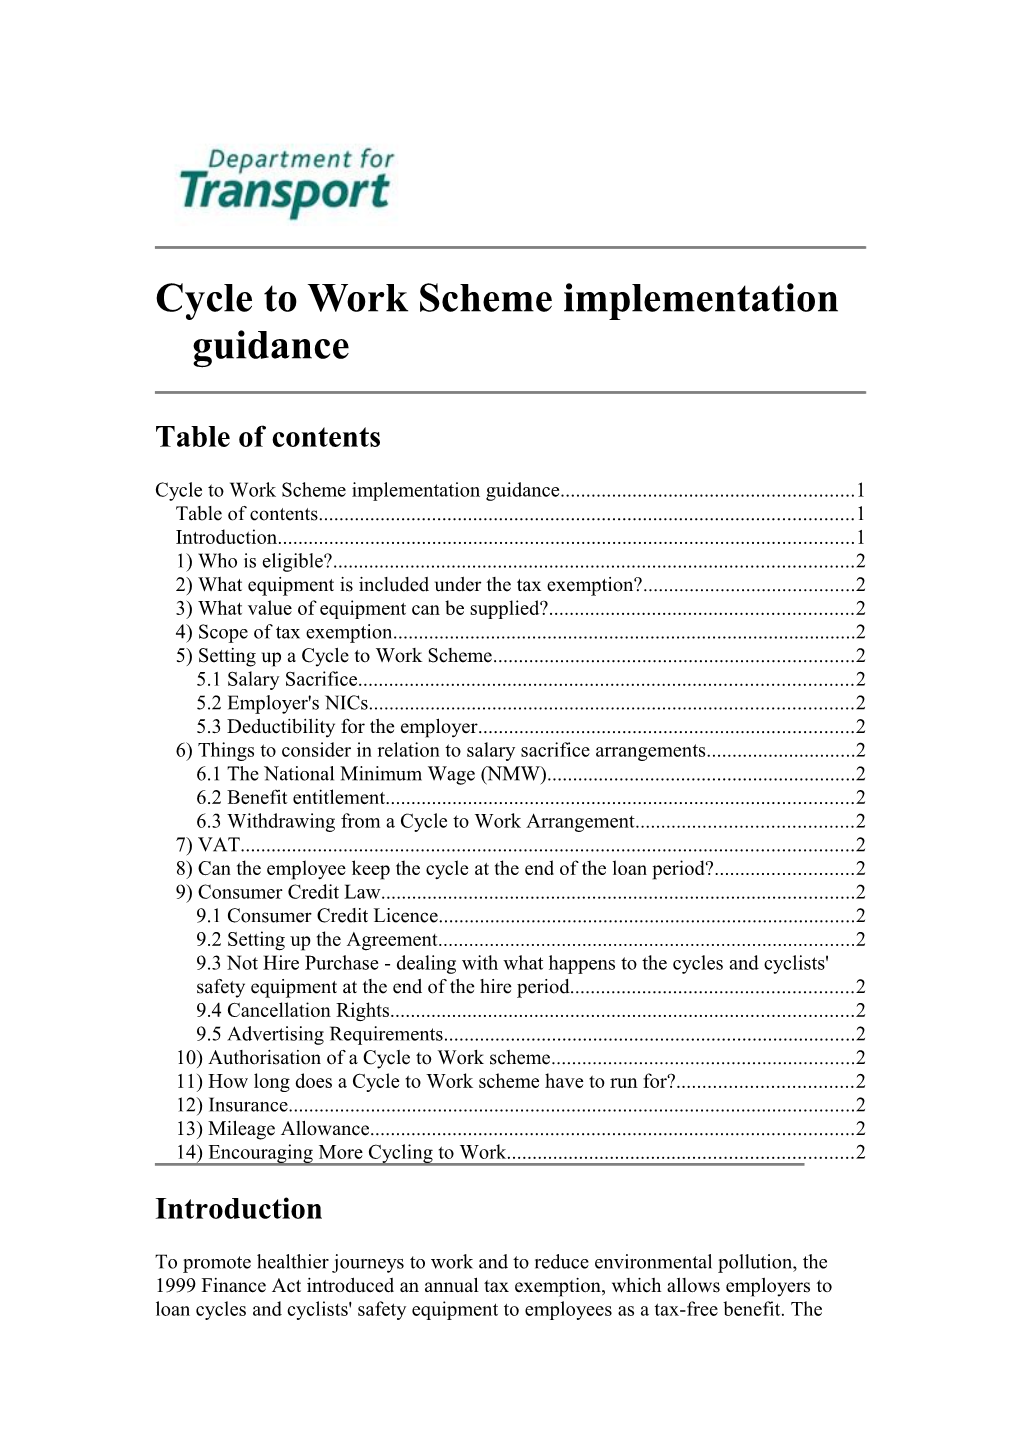 Cycle to Work Scheme Implementation Guidance